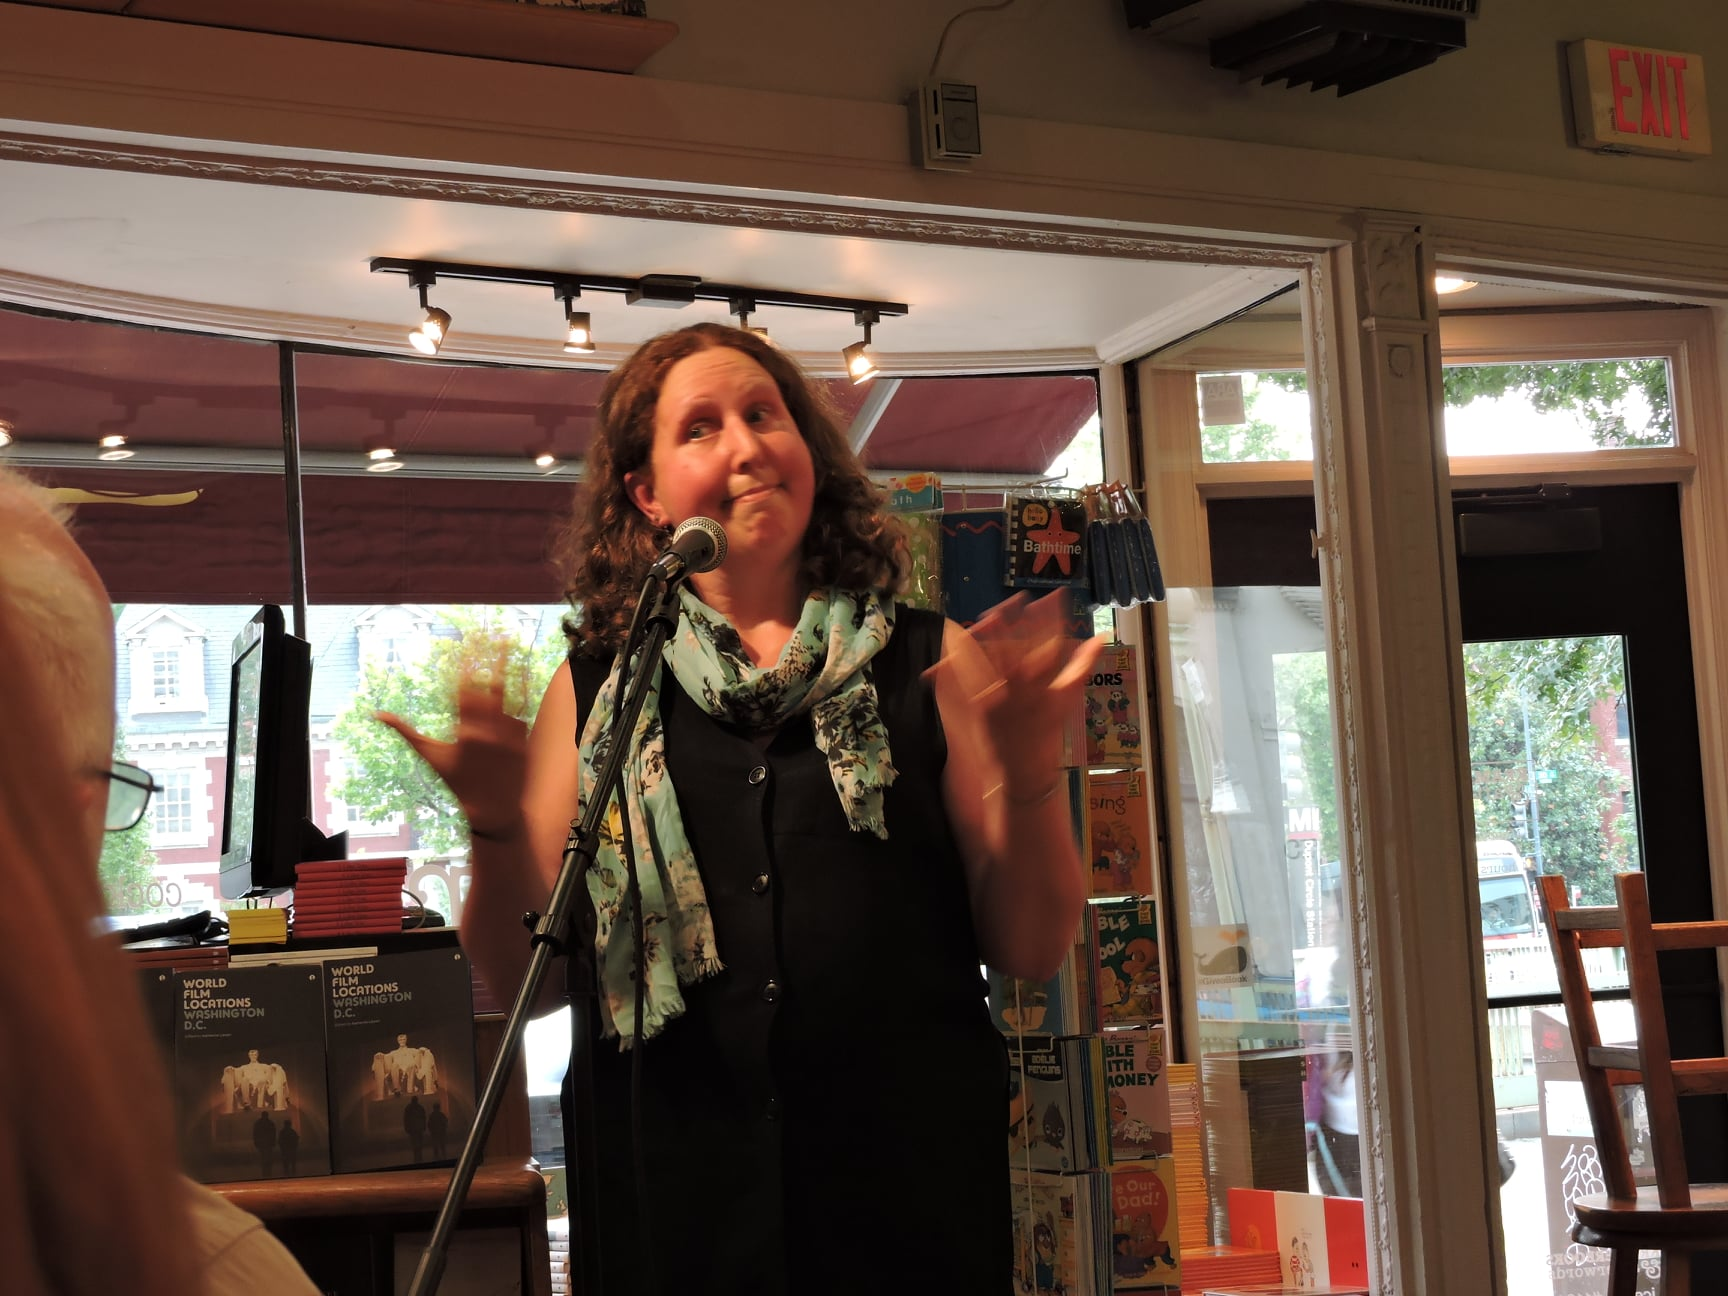 Kathy Larsen at an event for her film locations book launch doing jazz hands on stage